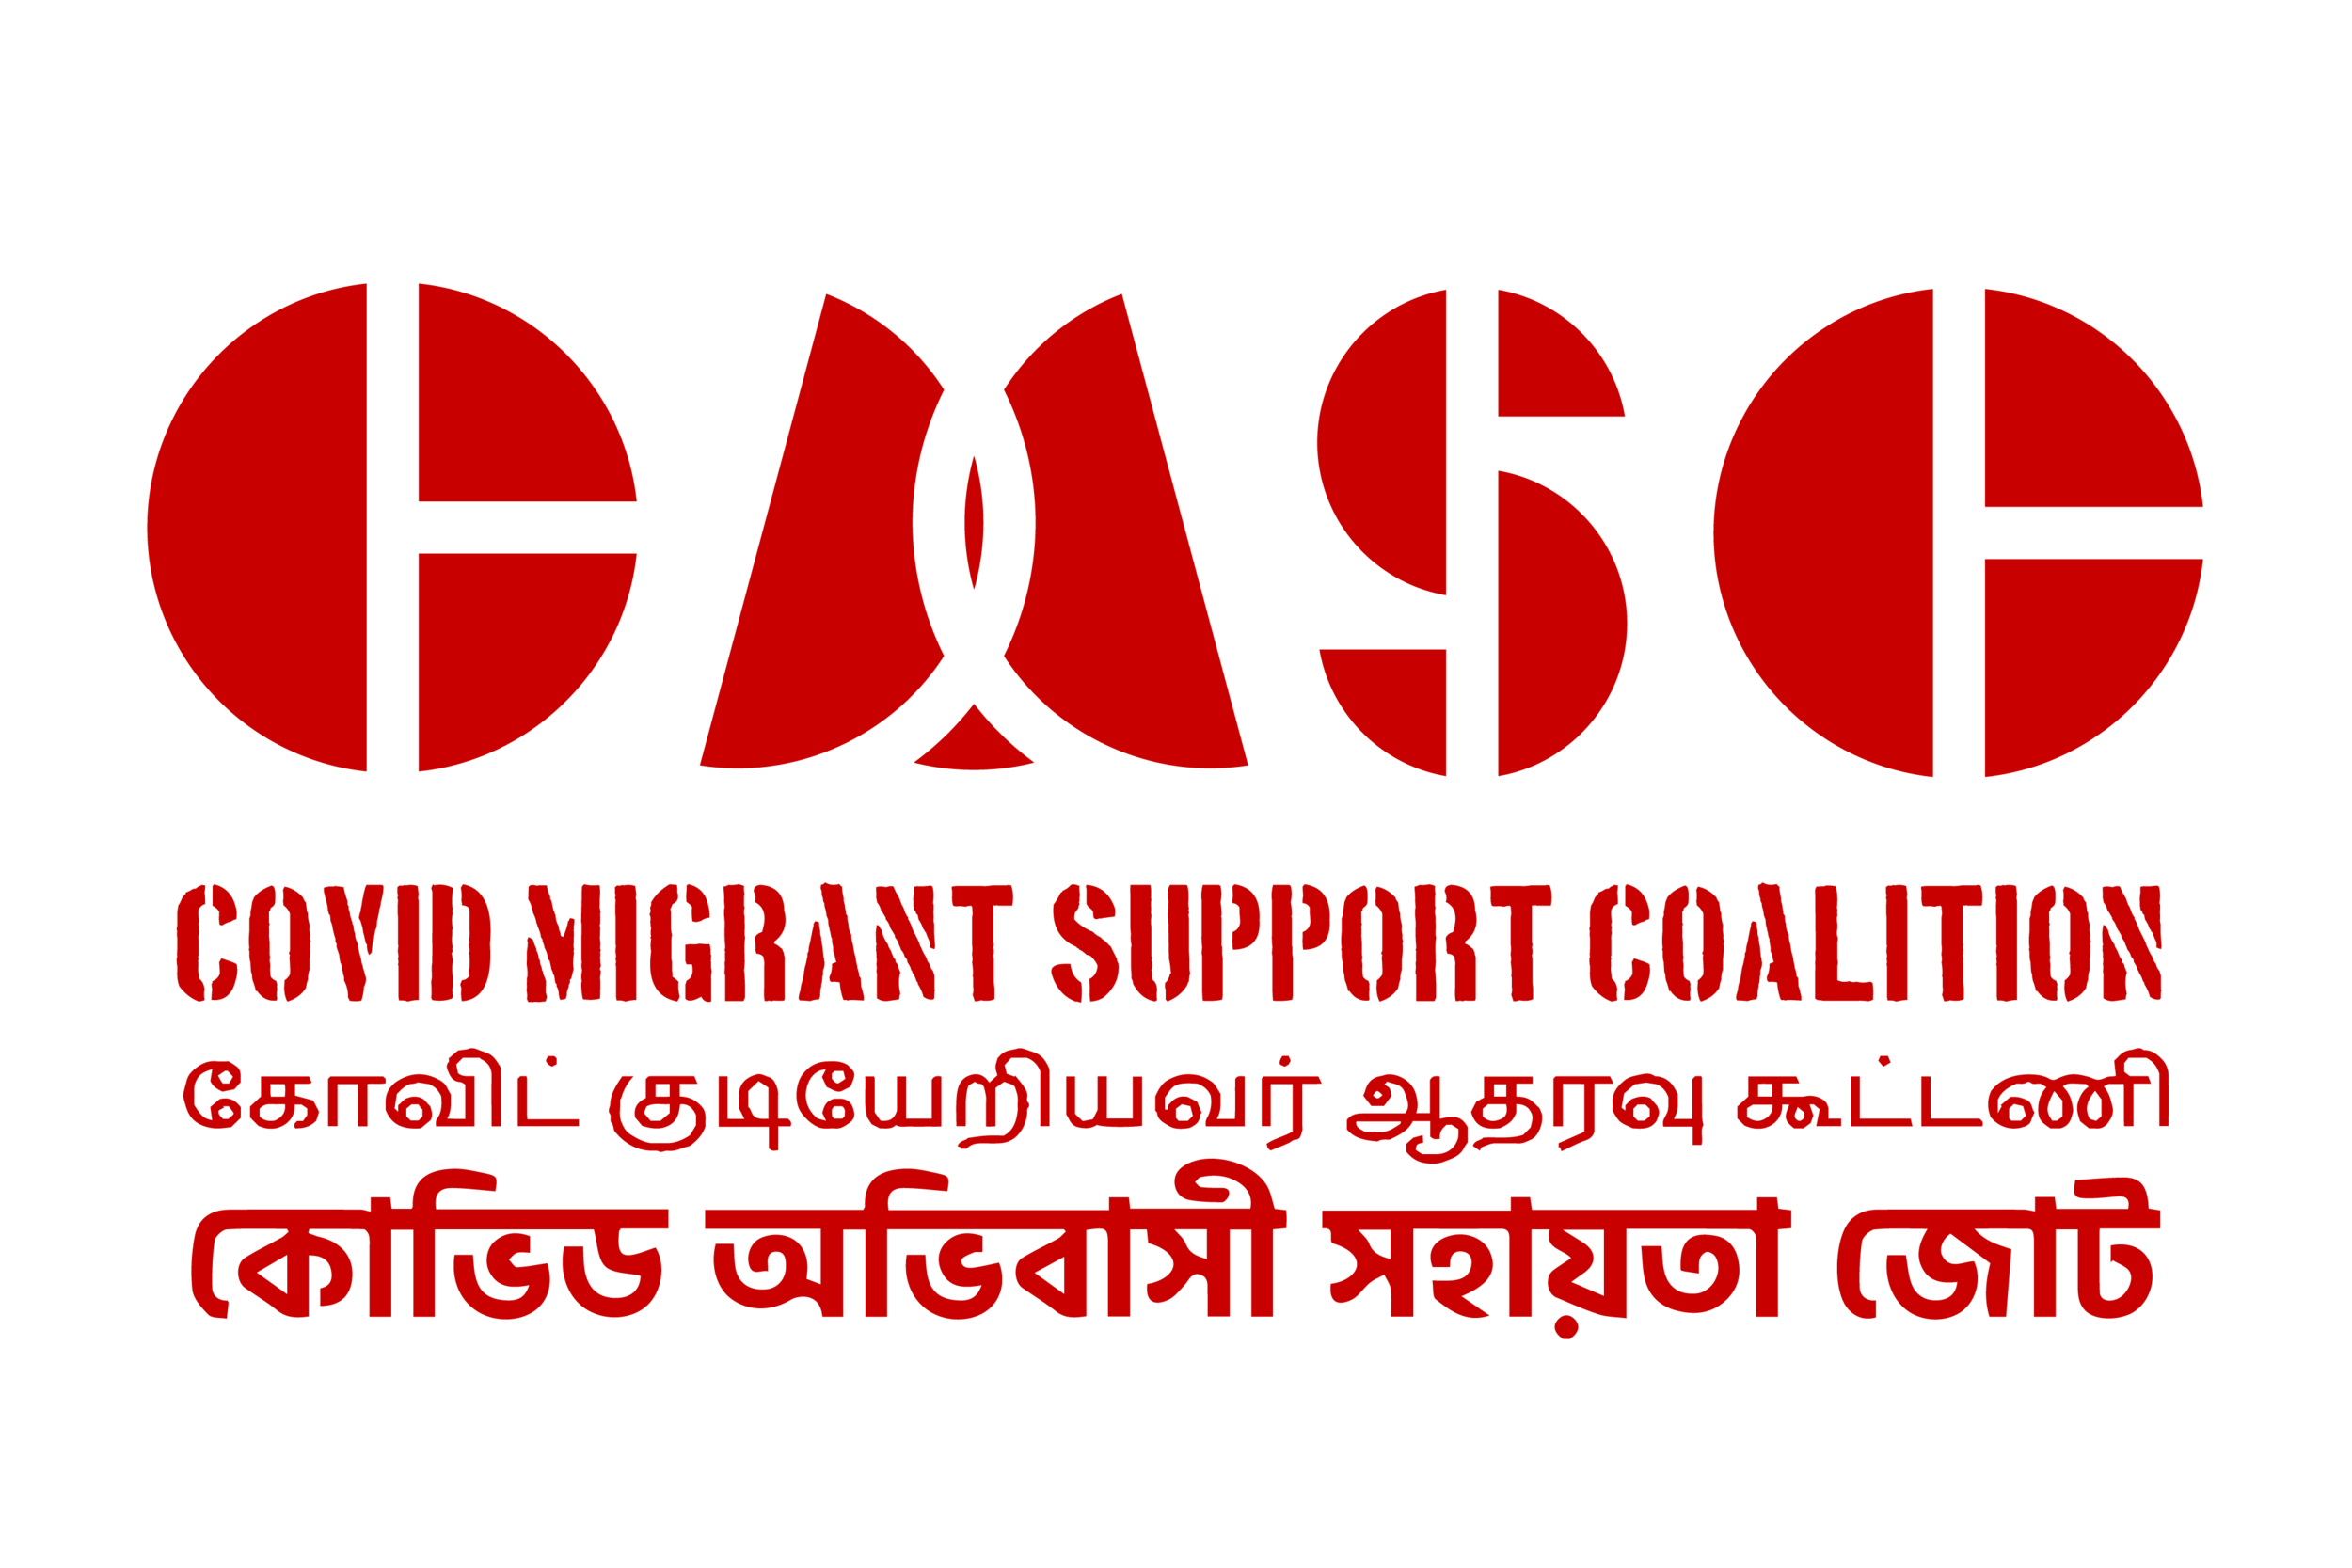 My_Brother_SG_Migrant_Worker_Engagement_Singapore_Homepage_Partners_CMSC Logo.png